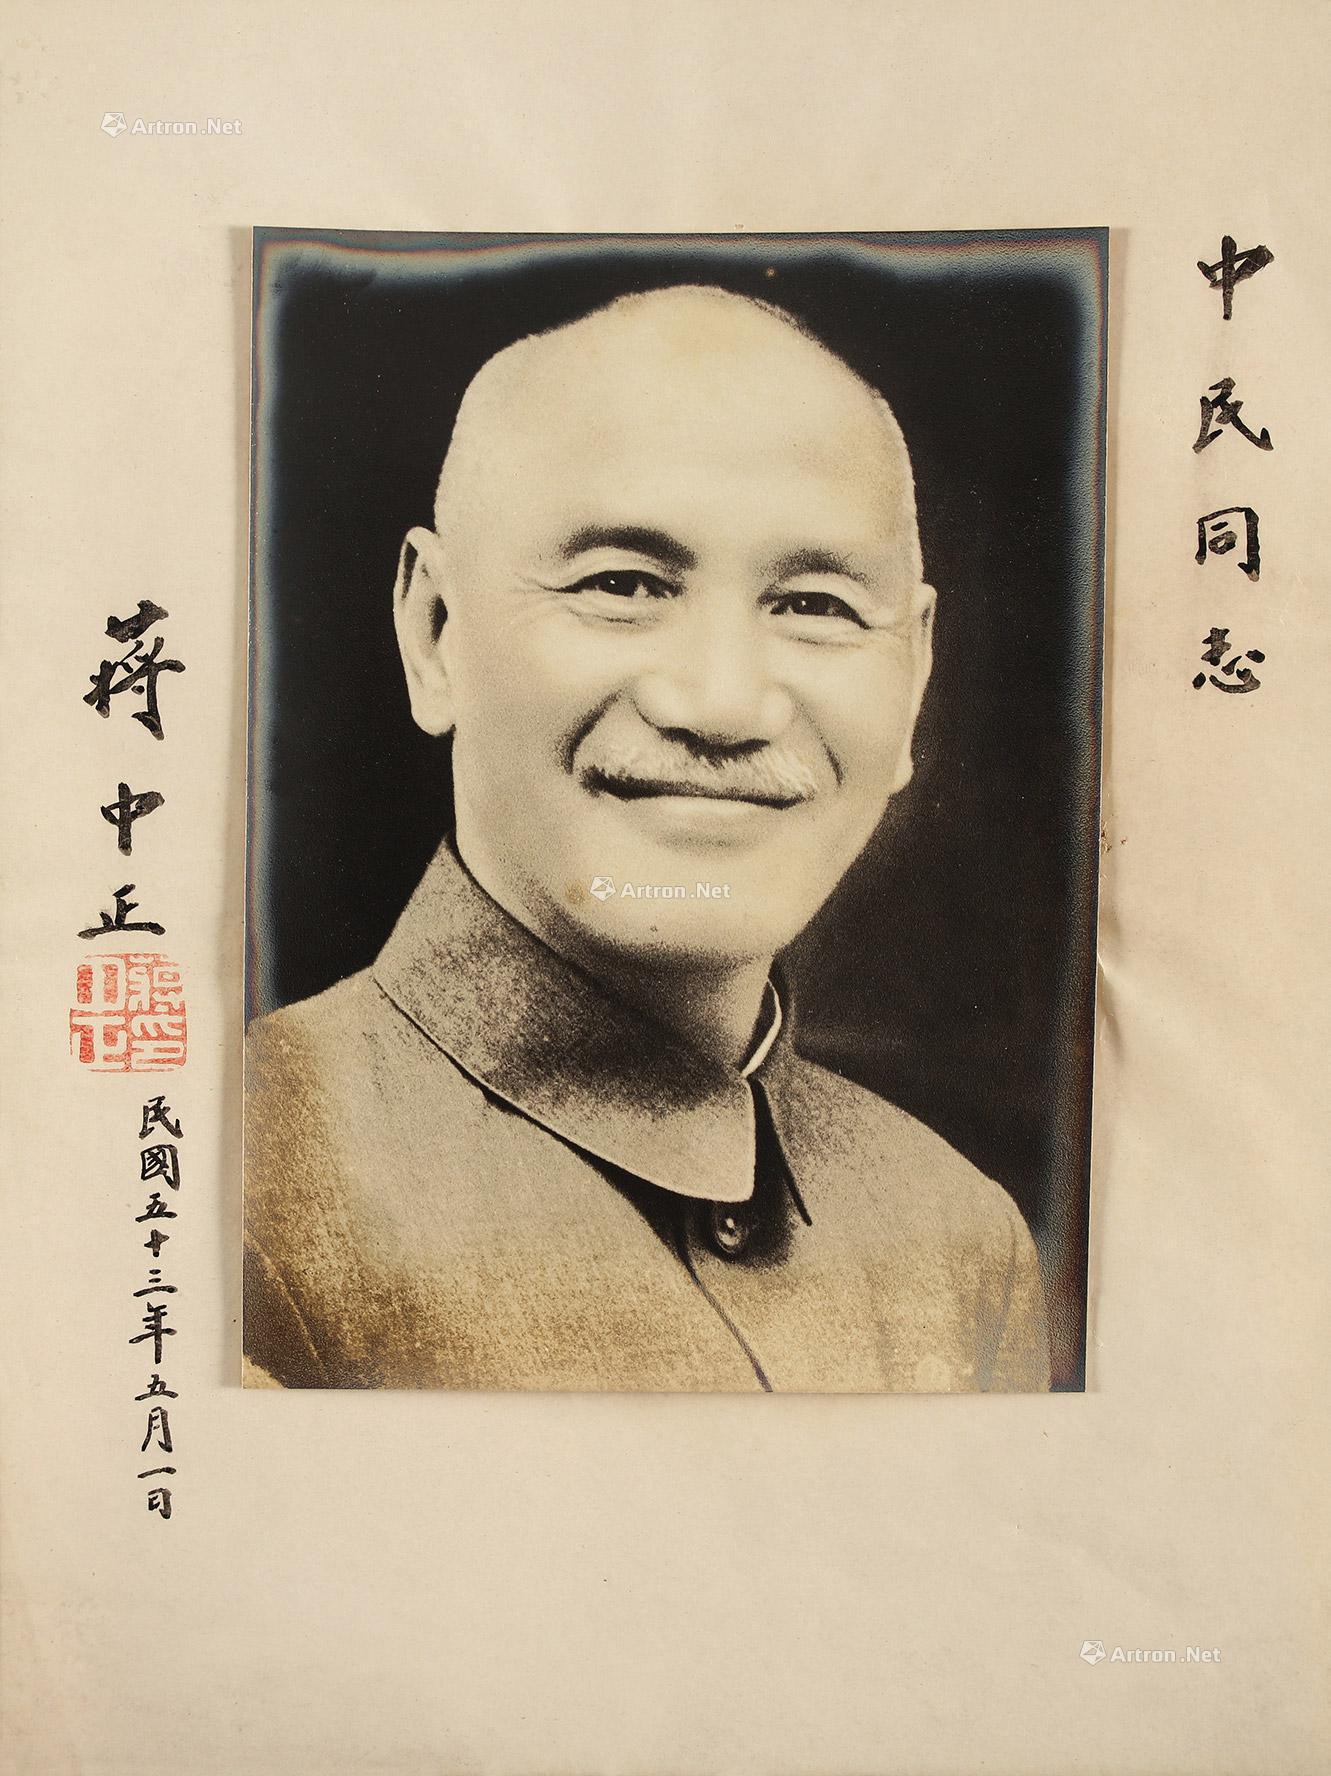 Printed photo autographed by Chiang Kai-shek